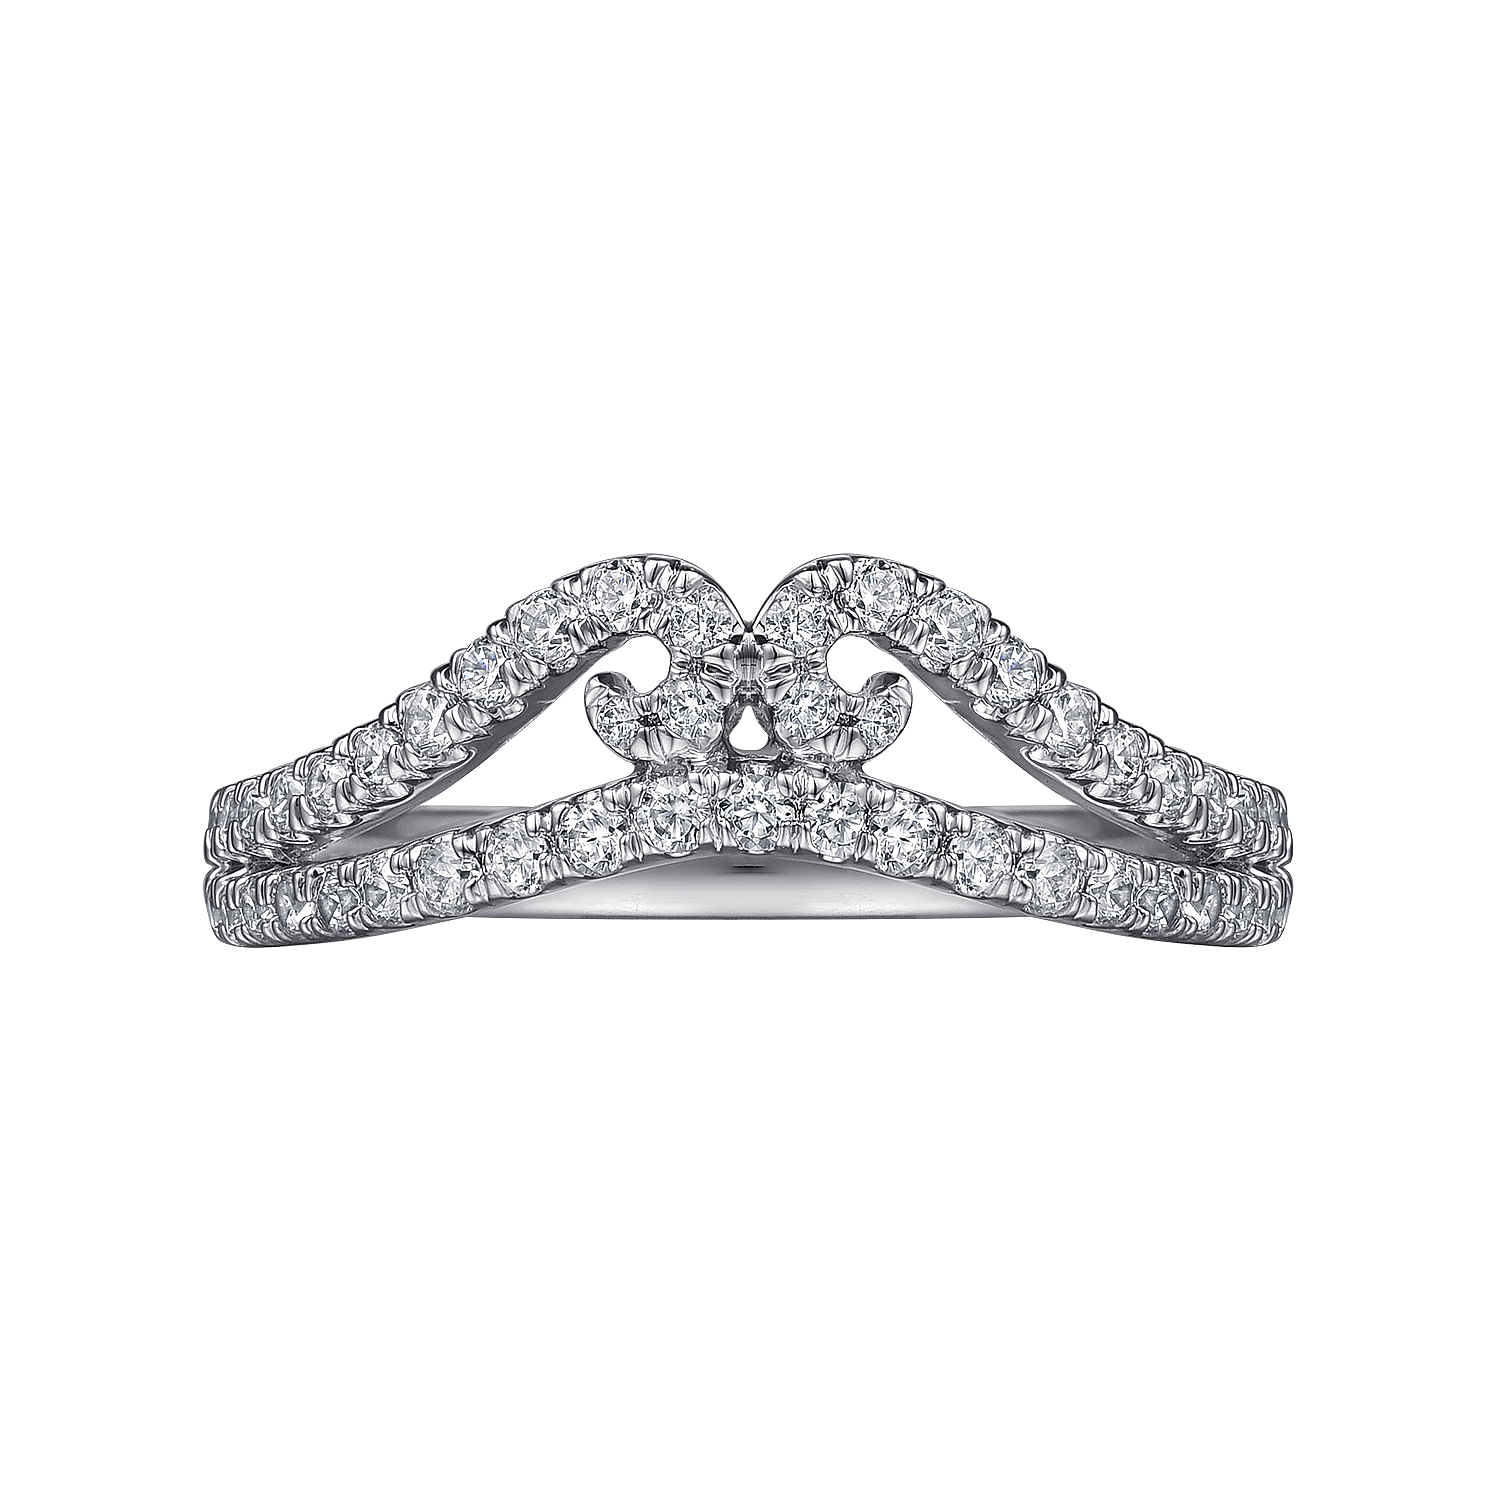 Curved 14K White Gold Twisted Diamond Anniversary Band